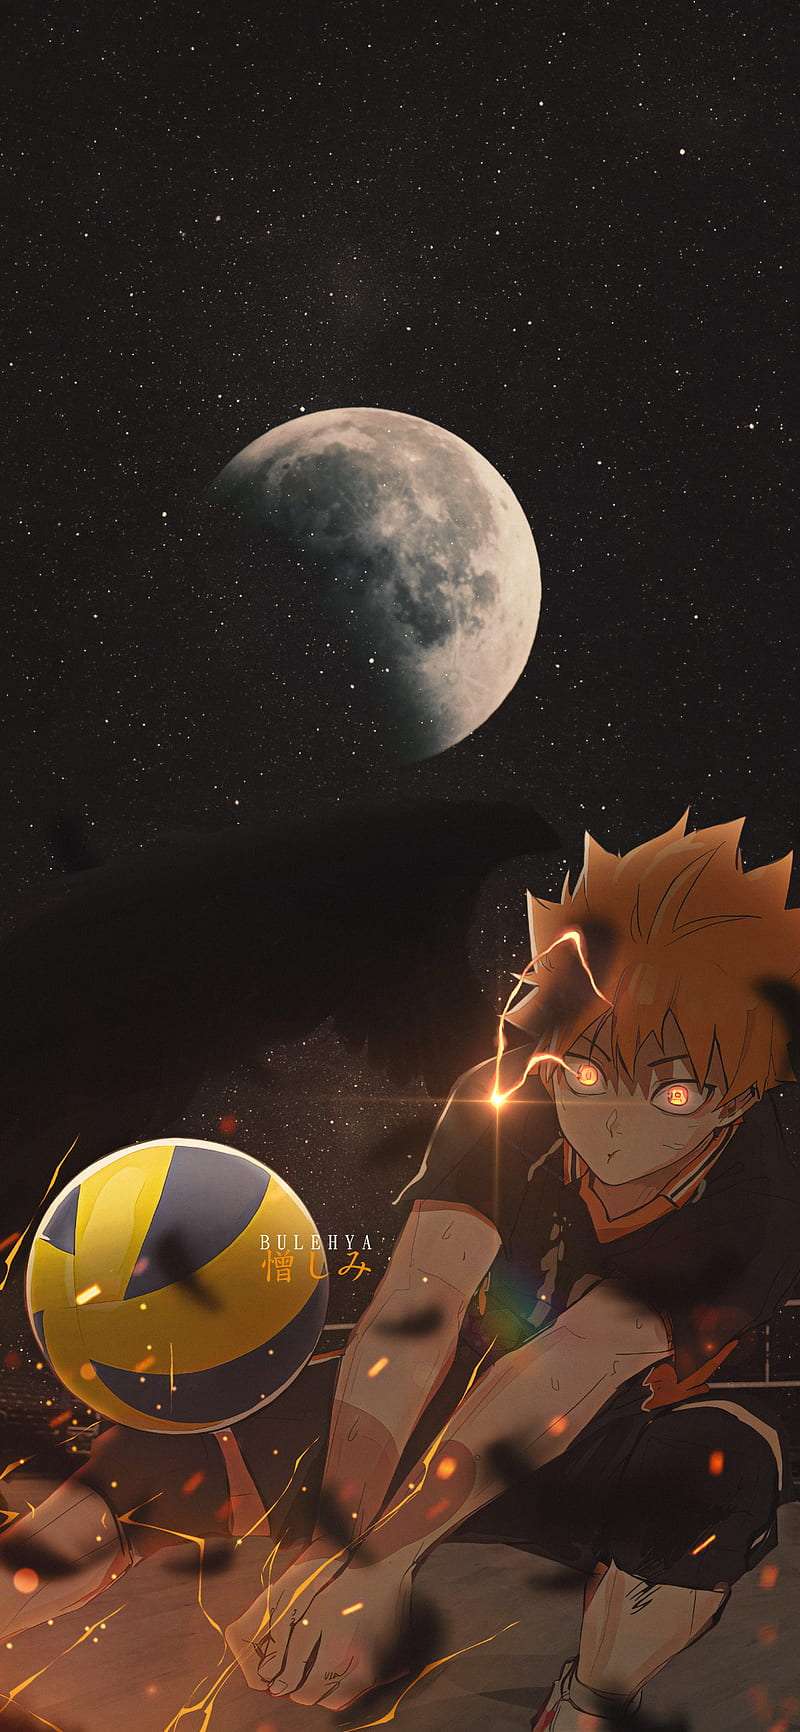 Volleyball wallpaper for iphone 14 10